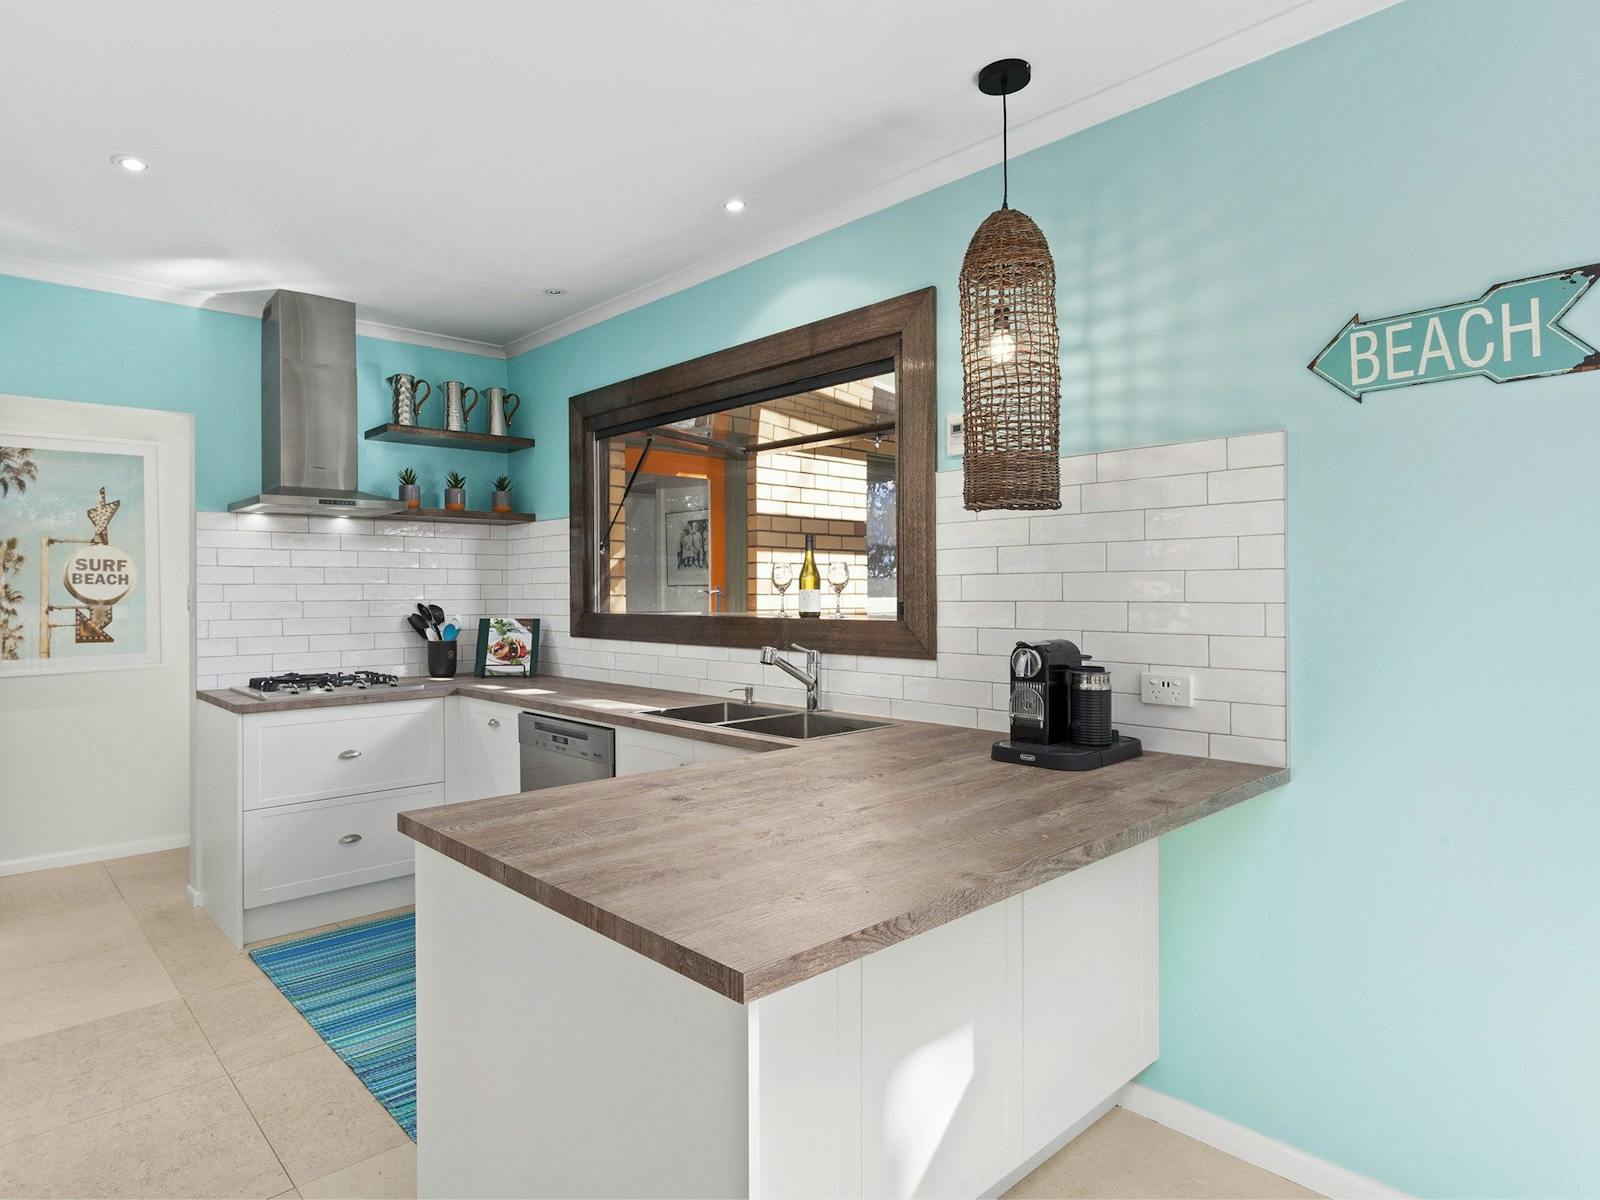 A beautful kitchen with beach styling